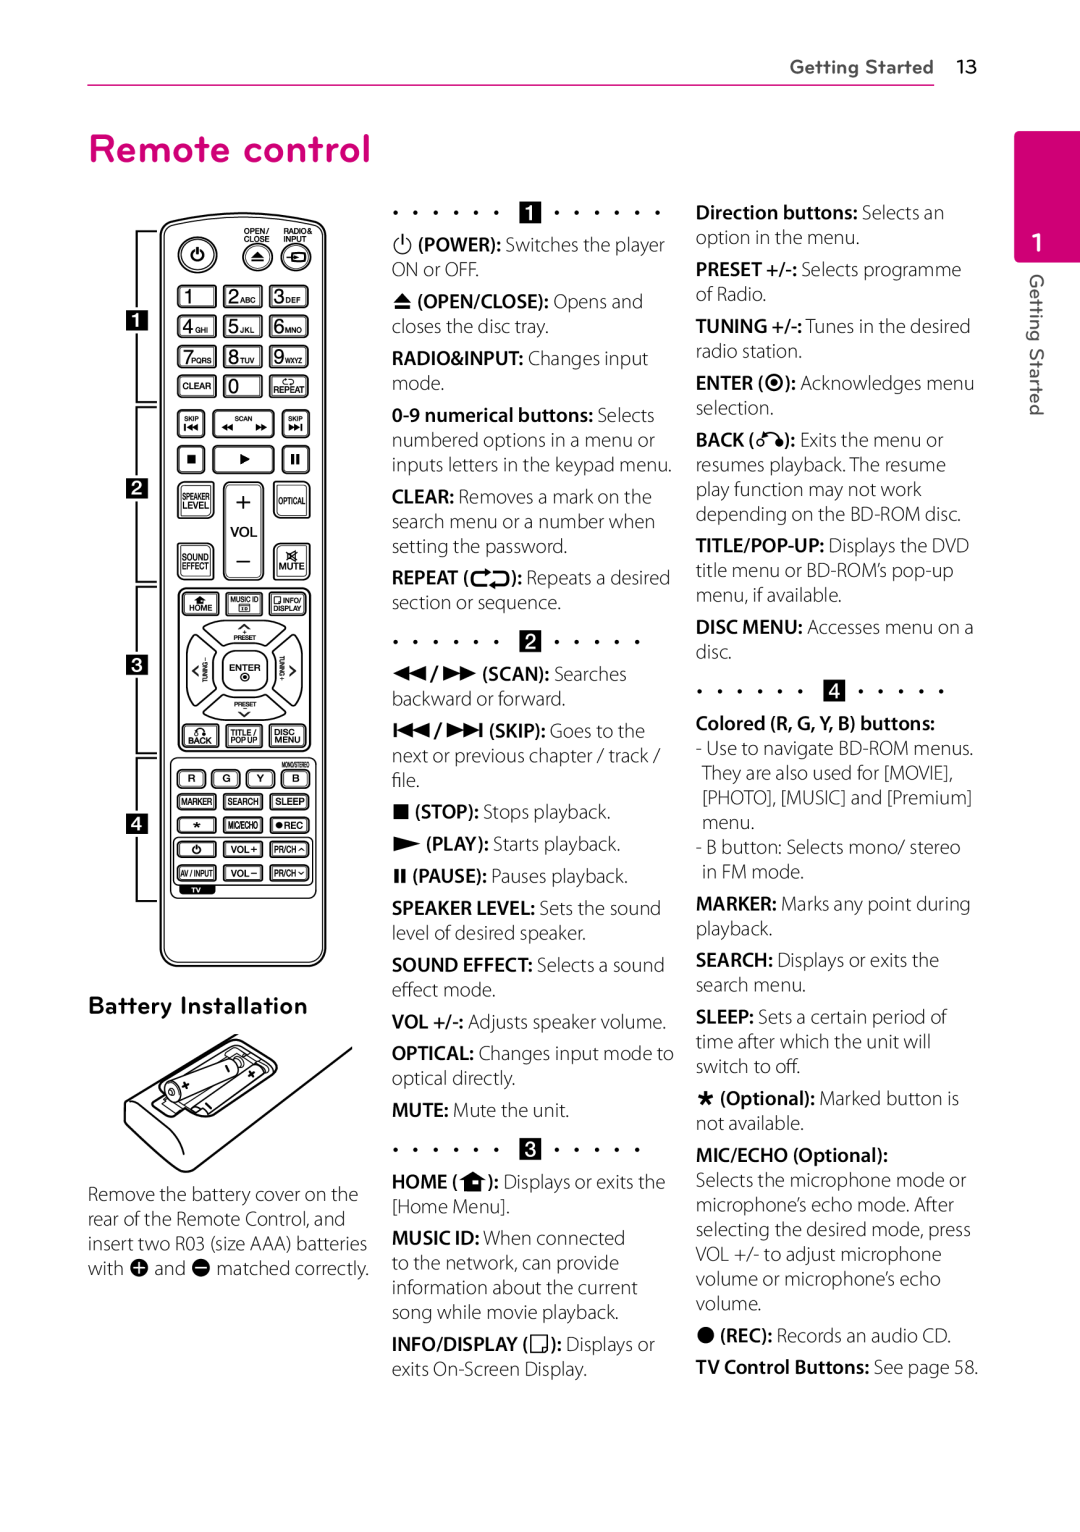 LG Electronics SH96SB-C Remote control, Battery Installation, BOPEN/CLOSE Opens and closes the disc tray, Getting Started 